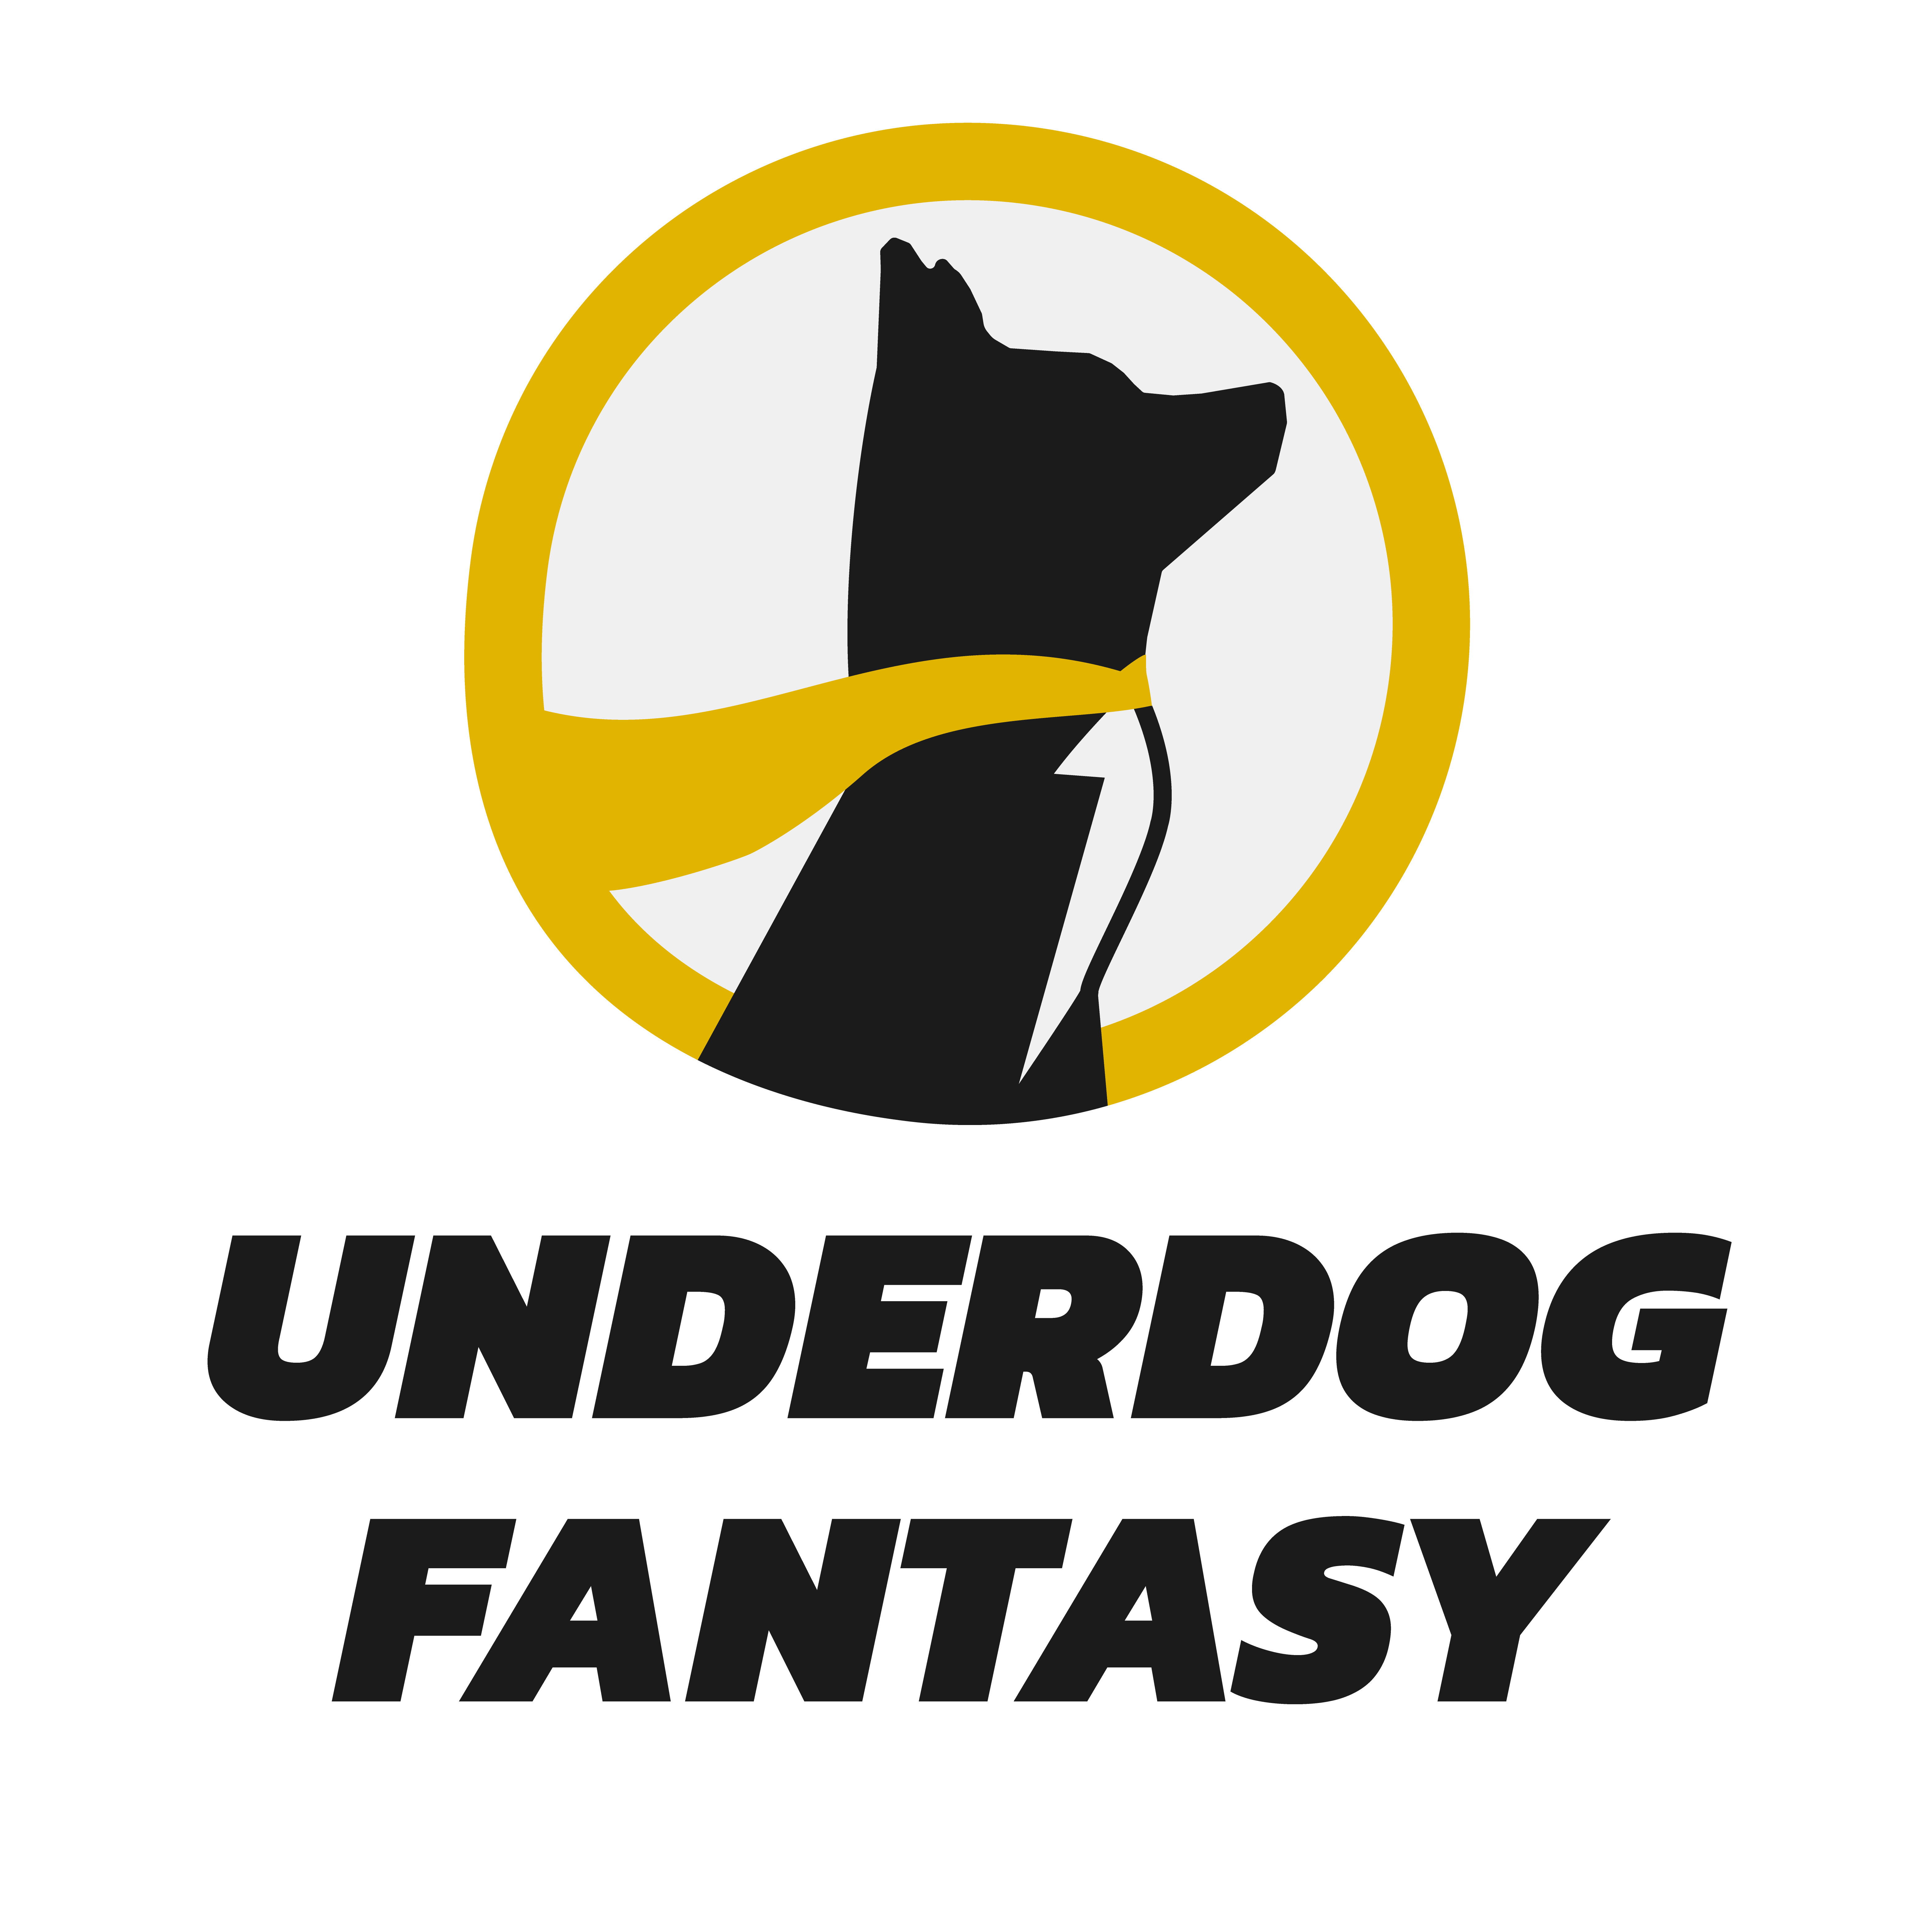 What Is Underdog Fantasy And How Is It Different? BroBible